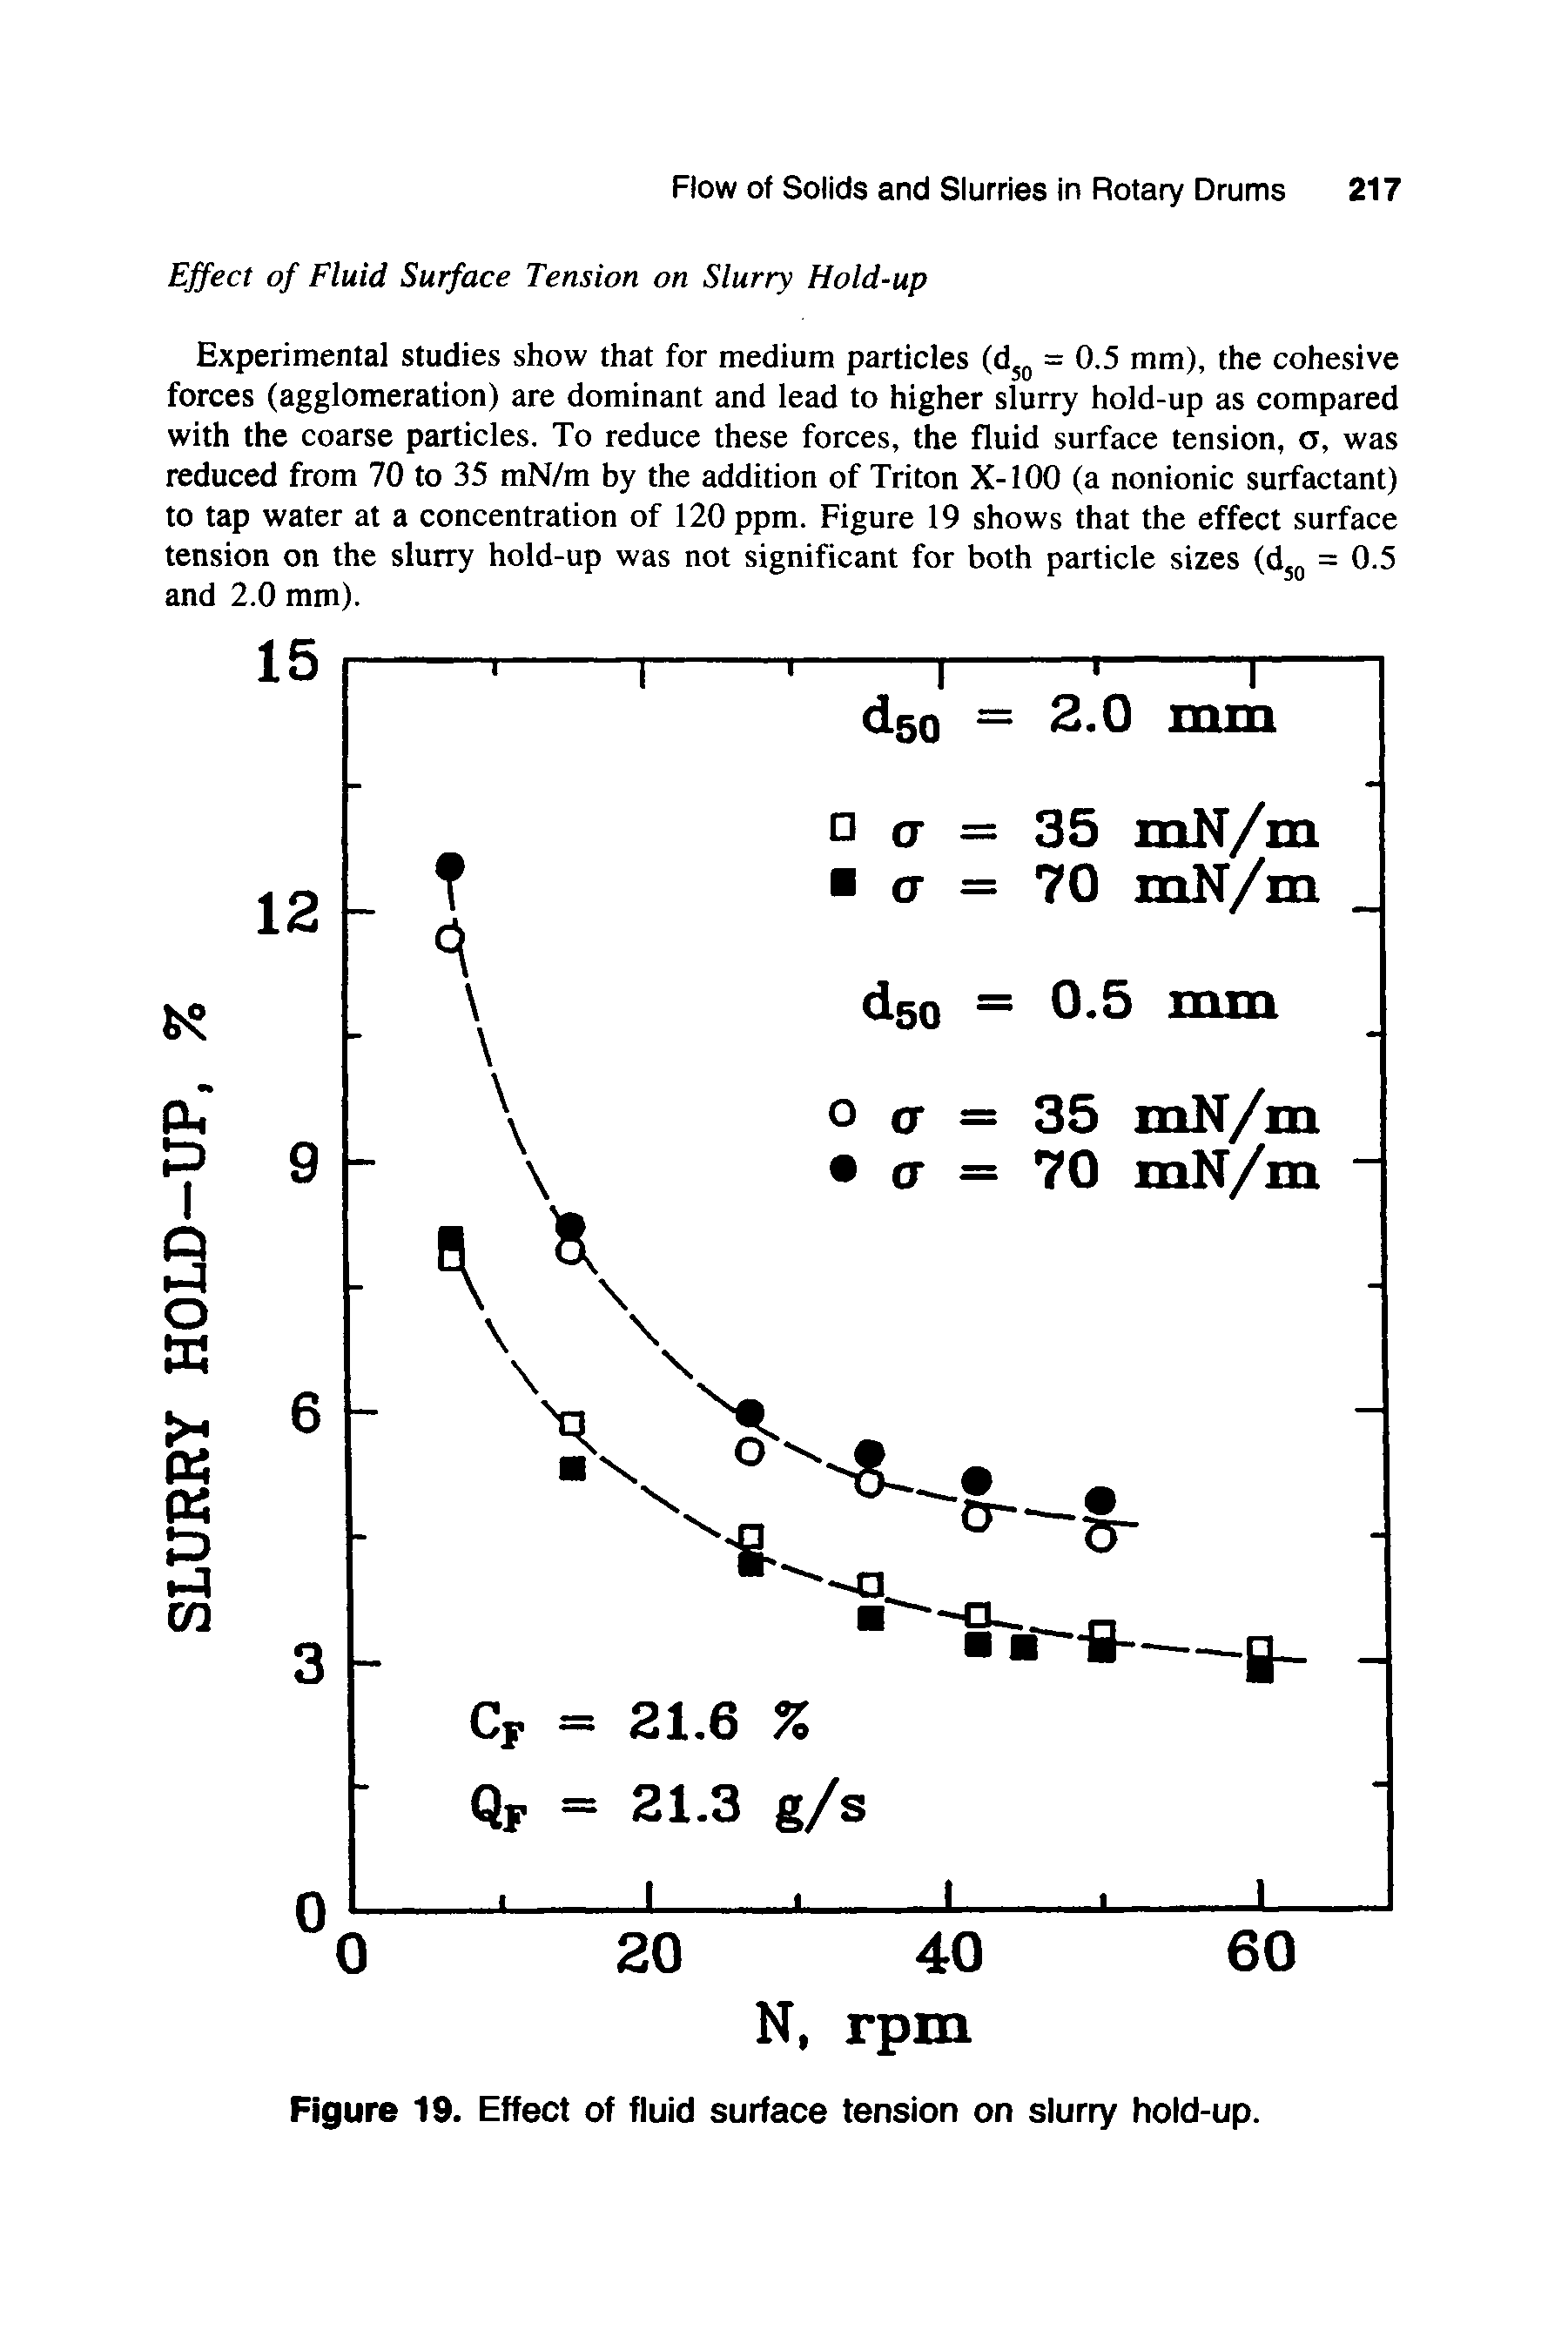 Figure 19. Effect of fluid surface tension on slurry hold-up.